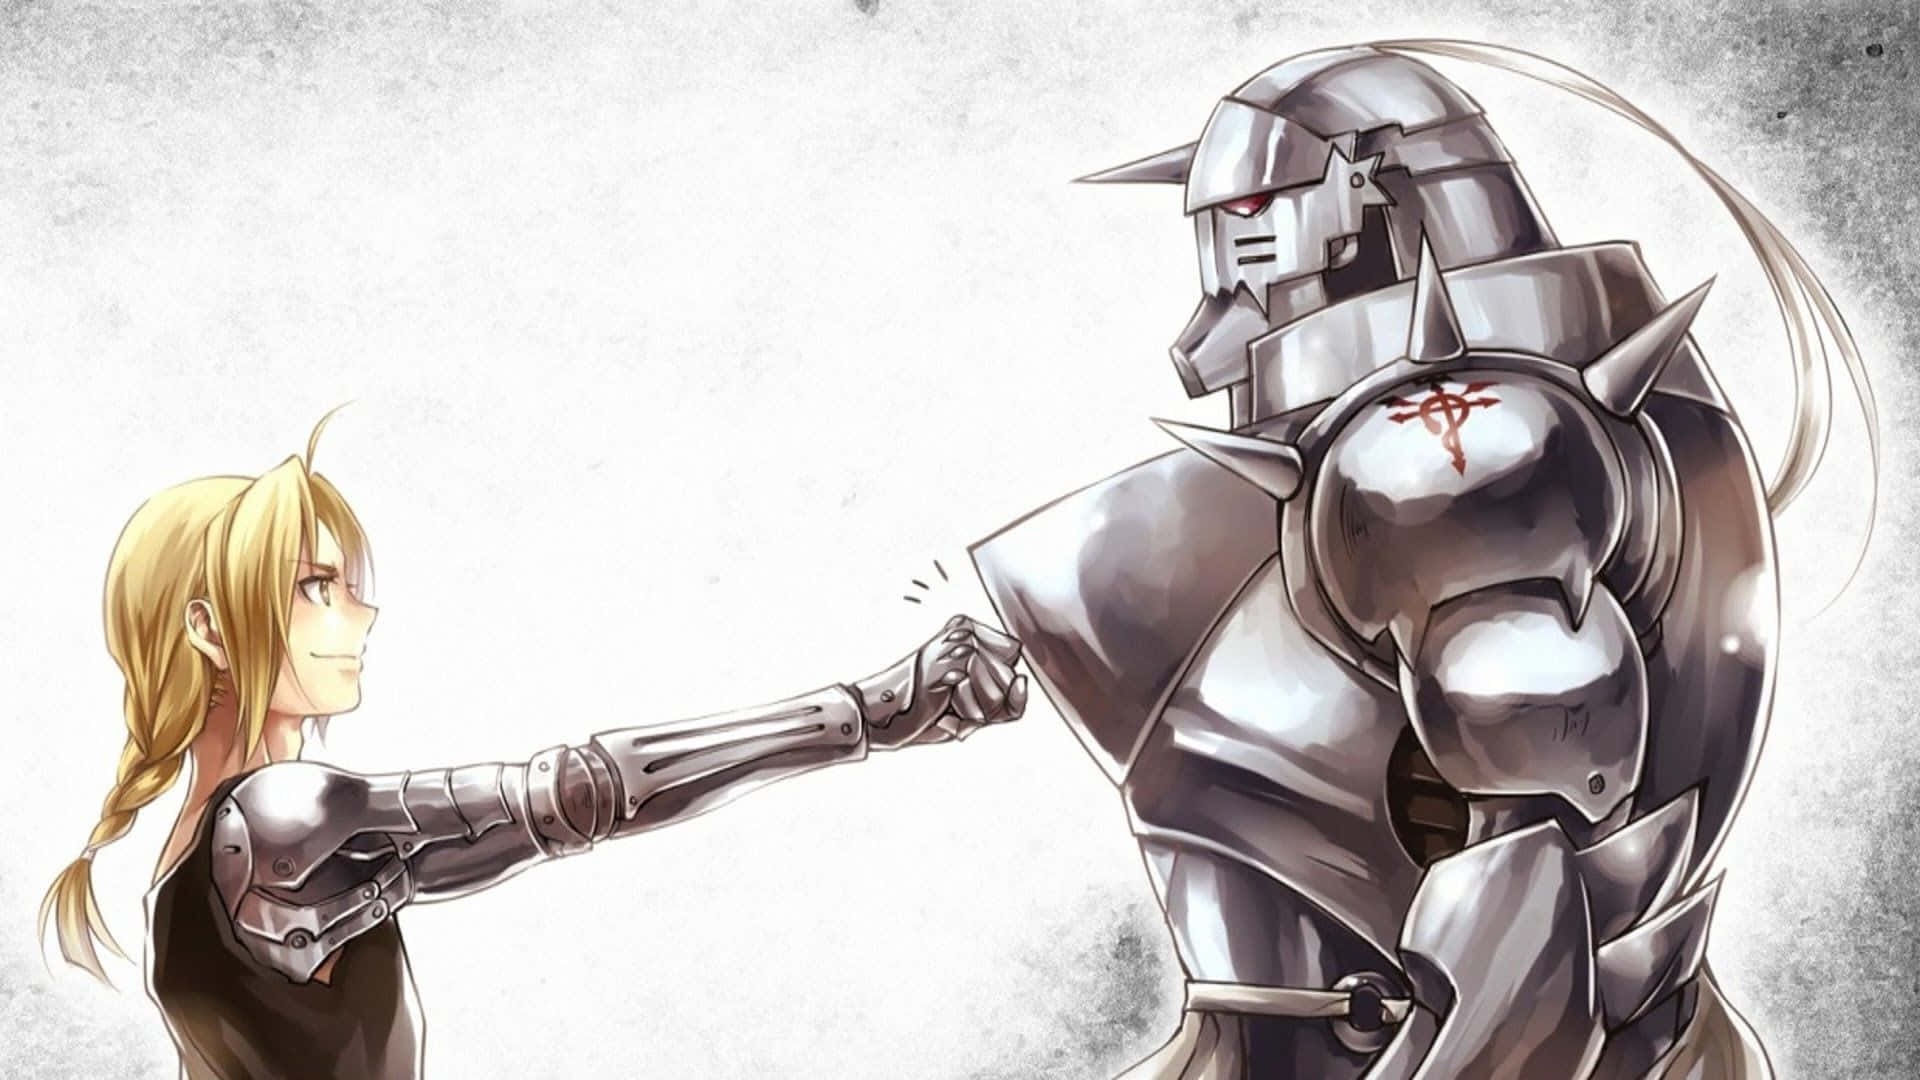 "brothers In Arms - Edward And Alphonse Elric, Fullmetal Alchemist Brotherhood"